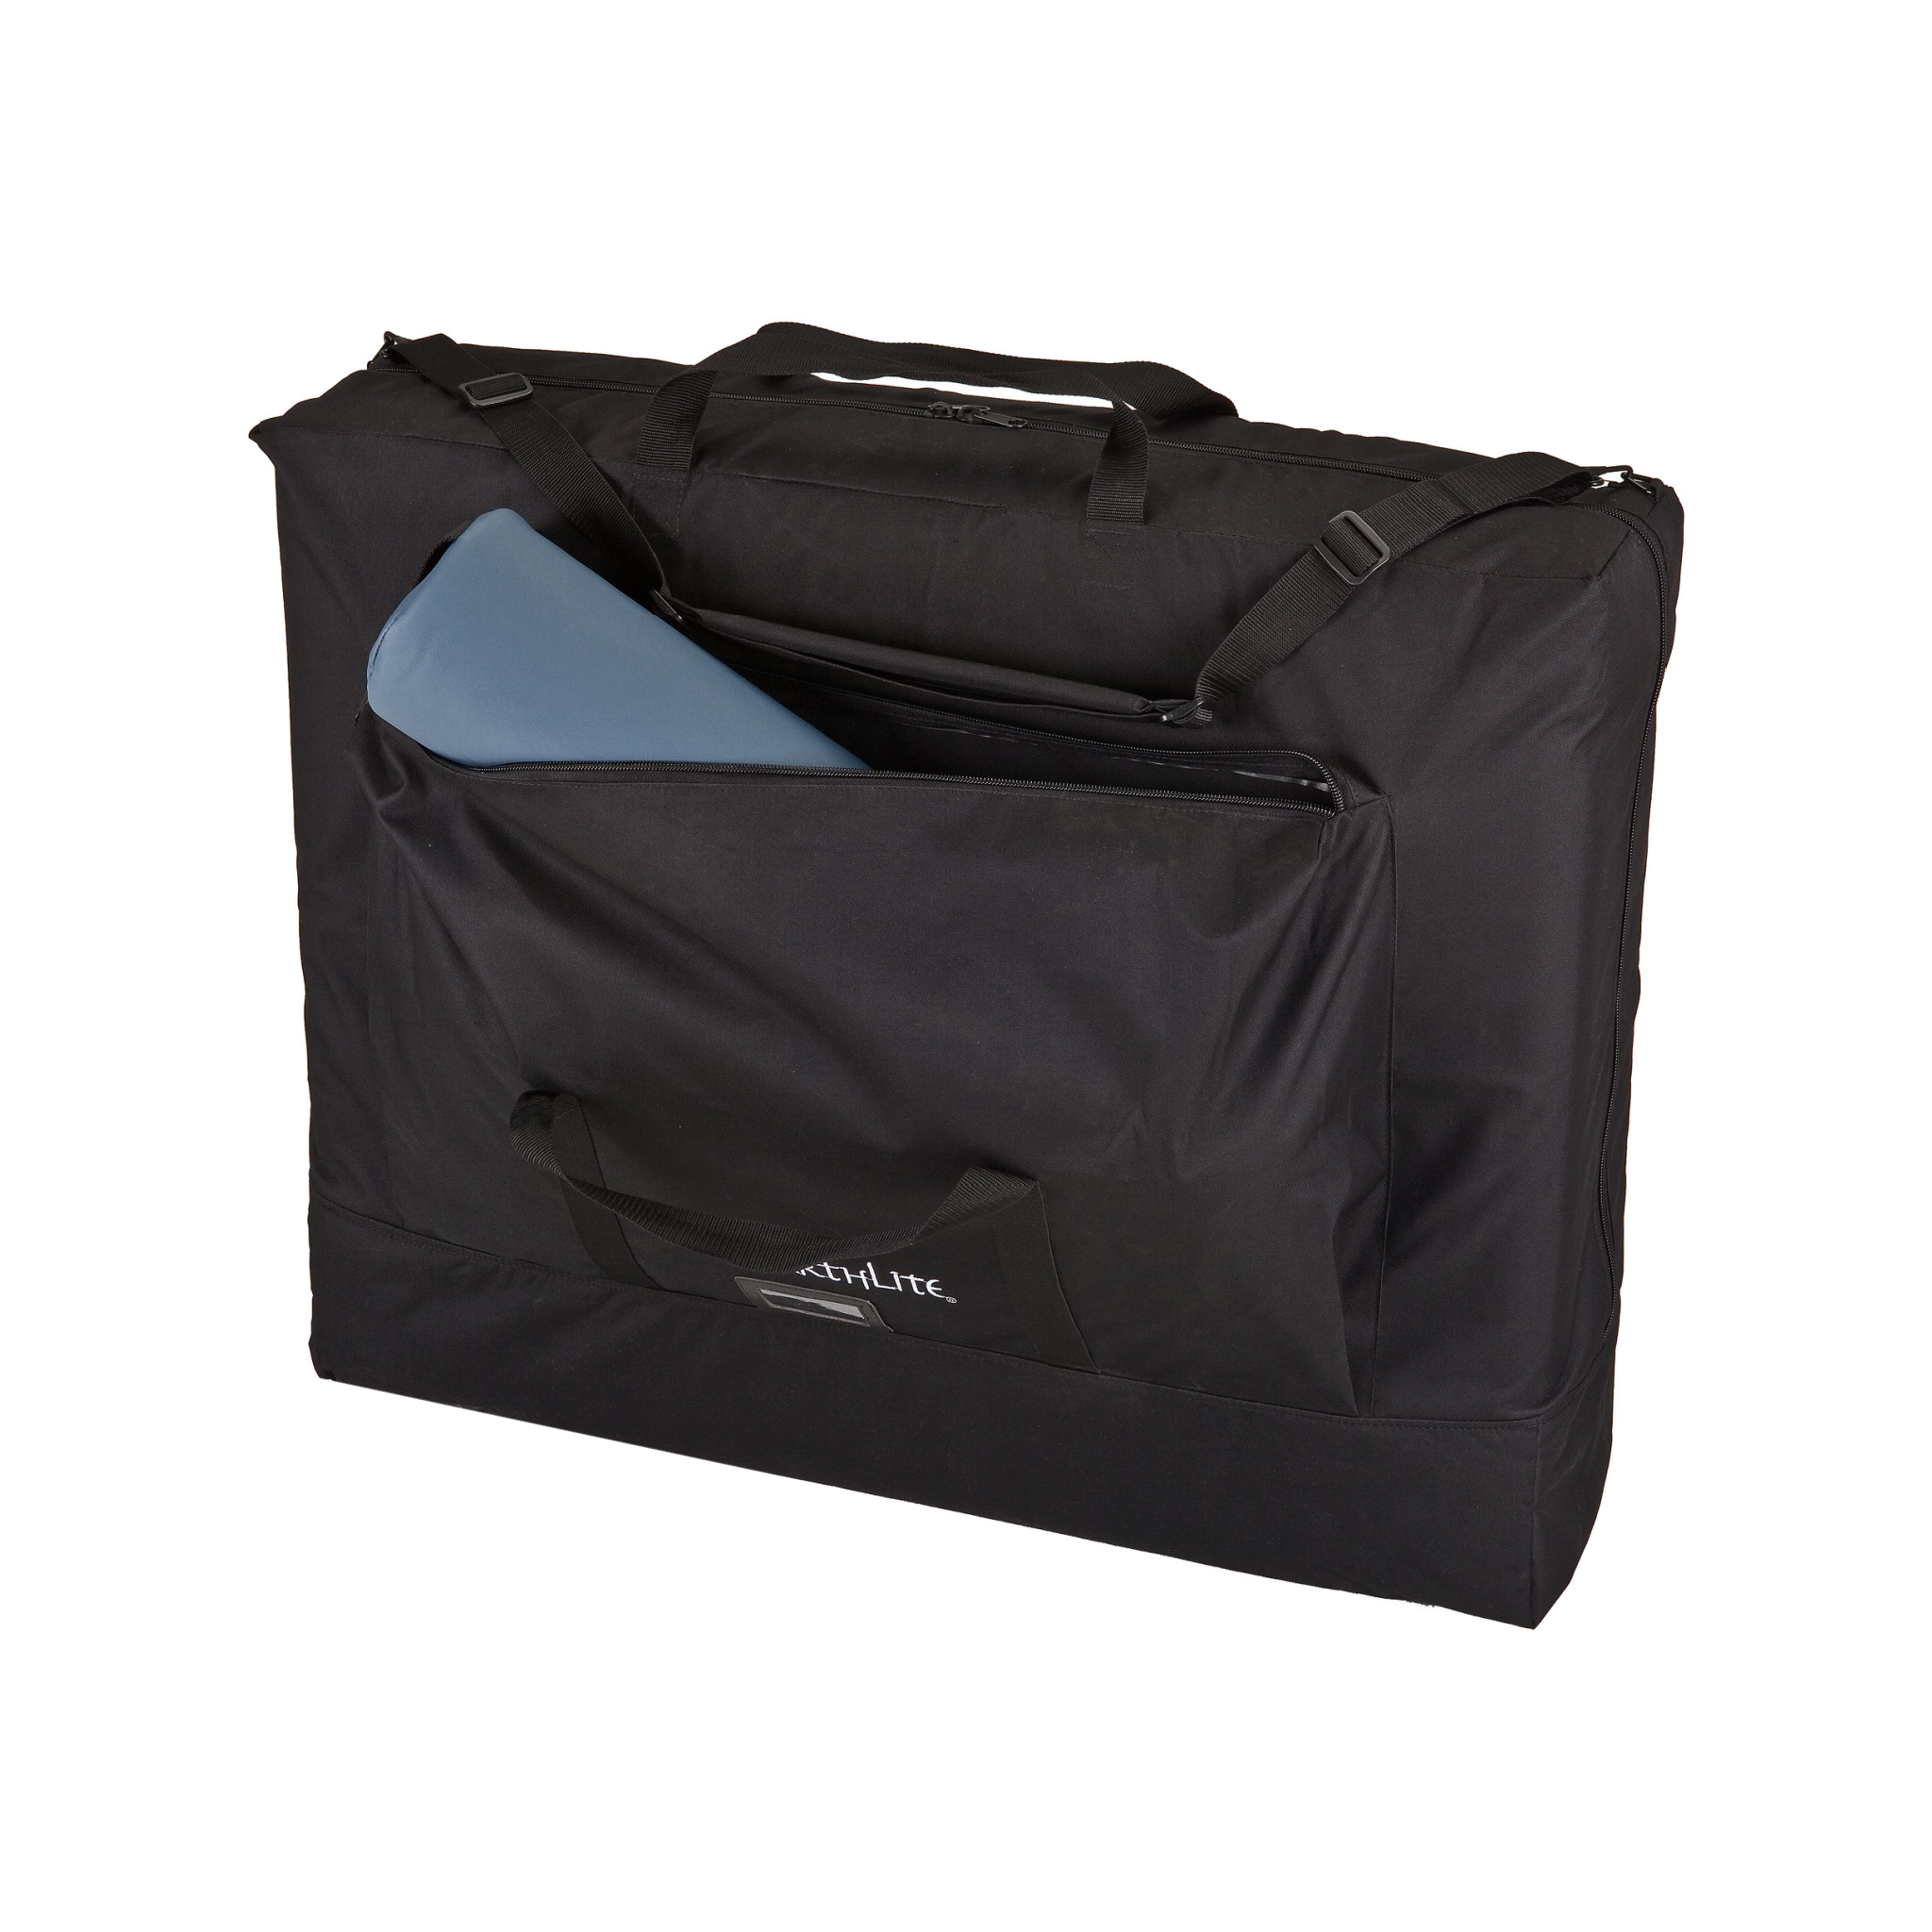 EarthLite Carrying Case for Massage Table